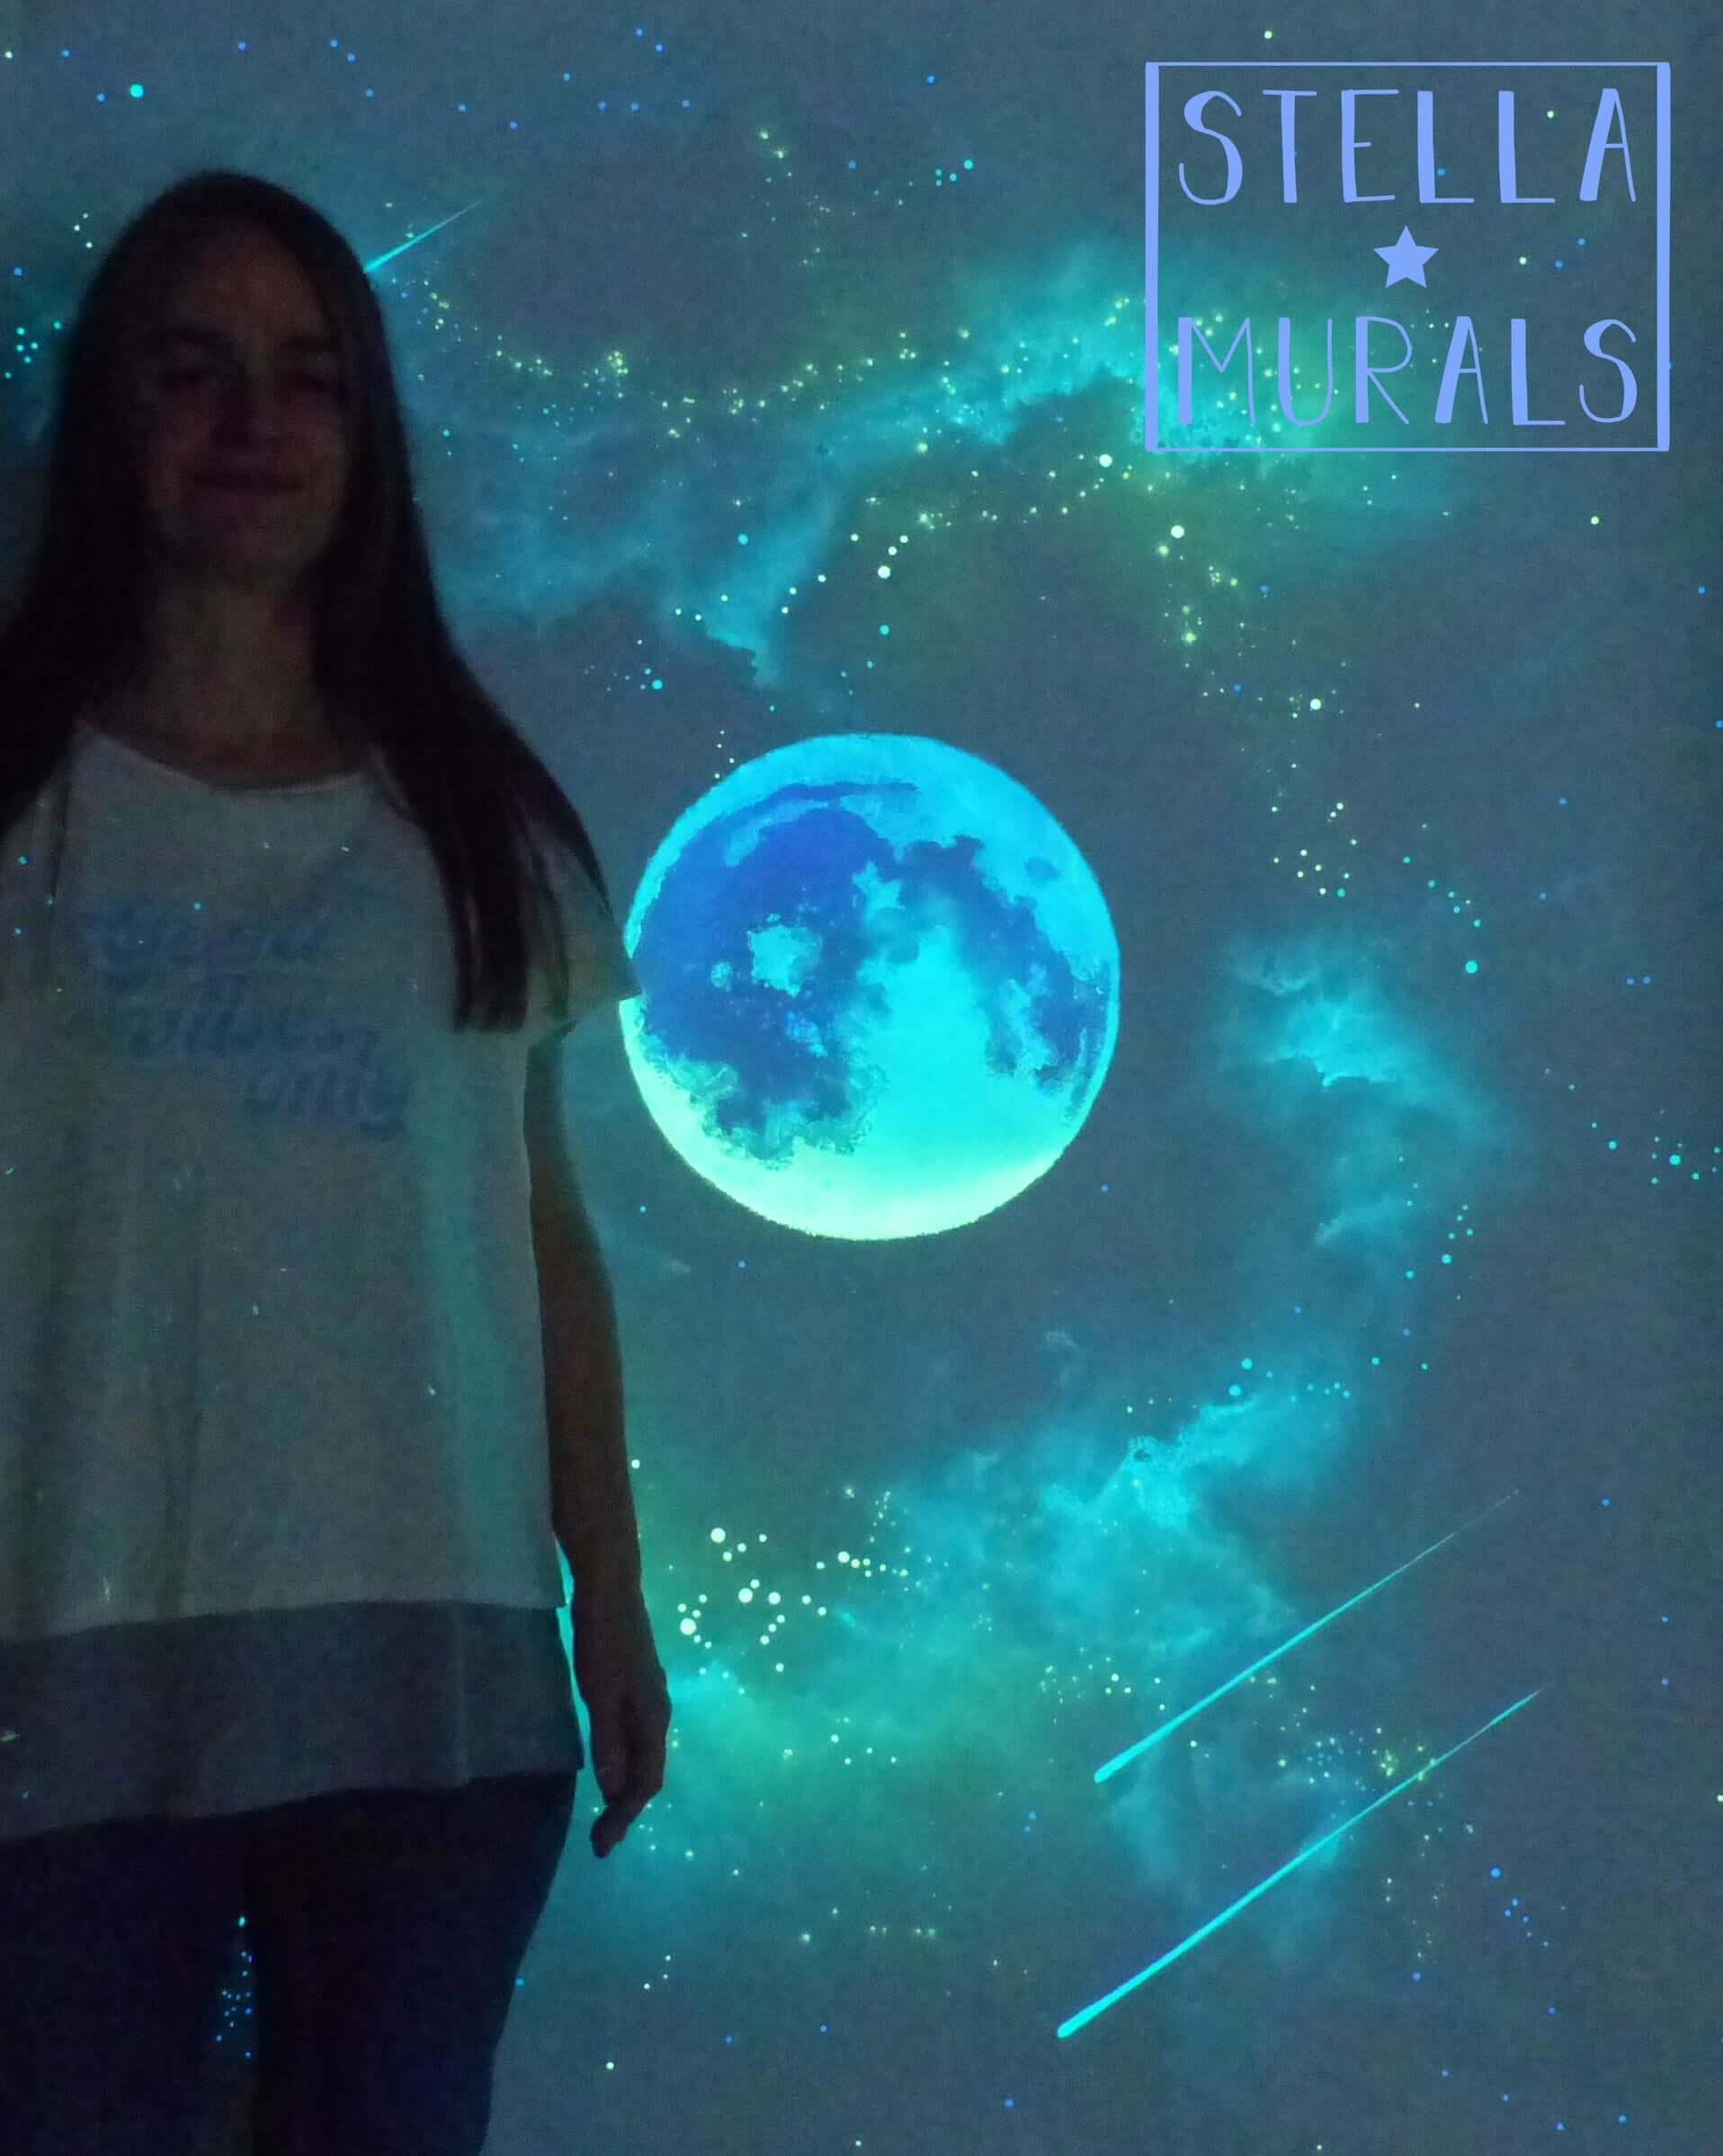 🌕 Glow in the Dark Star Ceiling  XL Large Ombre Moon Decal - Stella Murals